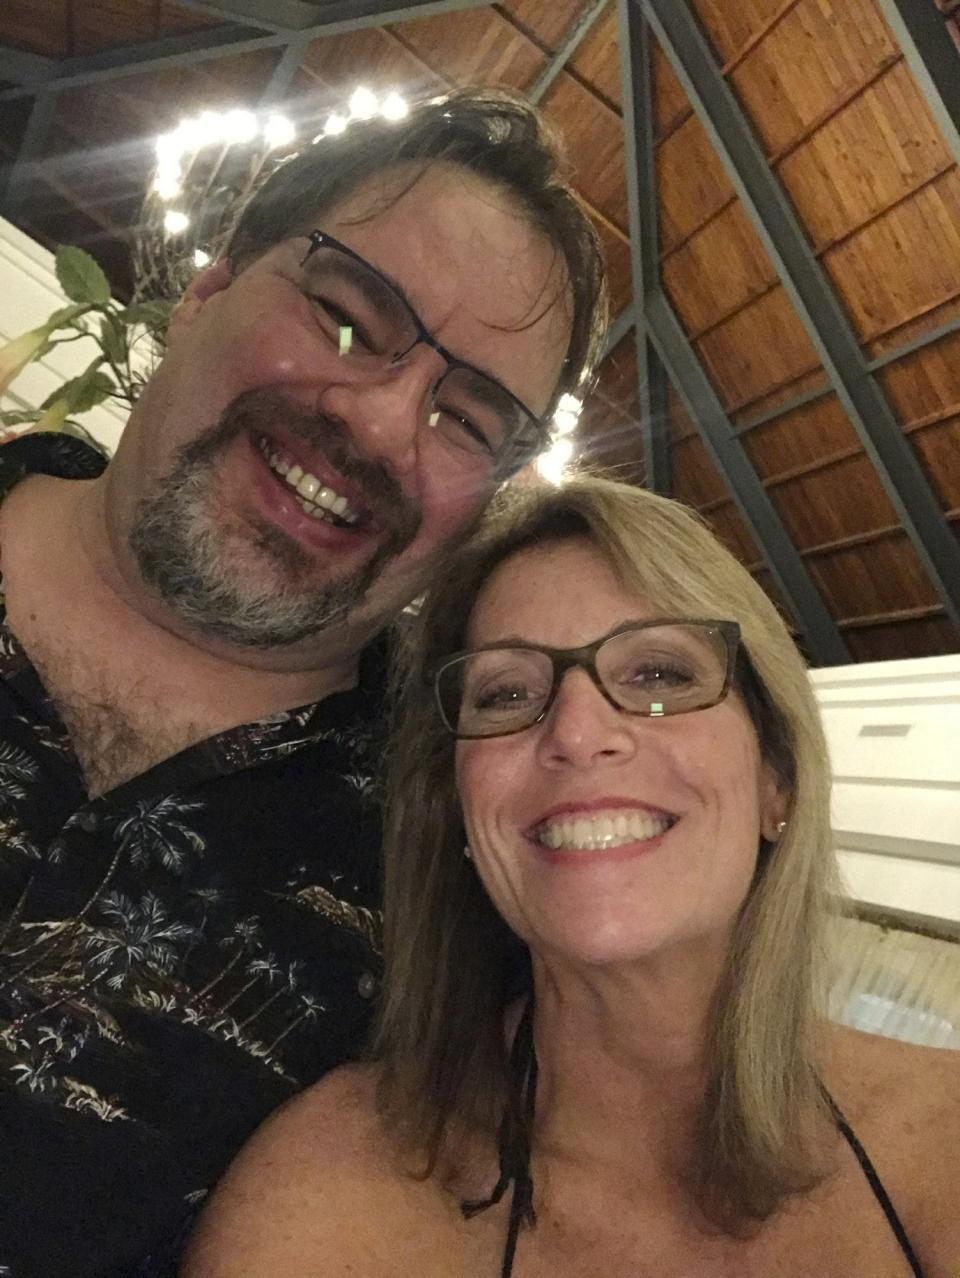 In this undated selfie taken by Tammy Lawrence-Daley, shows her with her husband Chris Daley. Police in the Dominican Republic are investigating an attack on Lawrence-Daley at a resort in Punta Cana, Dominican Republic in January. Lawrence-Daley made the attack public on social media, detailing a vicious hours-long assault by a man she said was wearing the uniform of an all-inclusive resort.